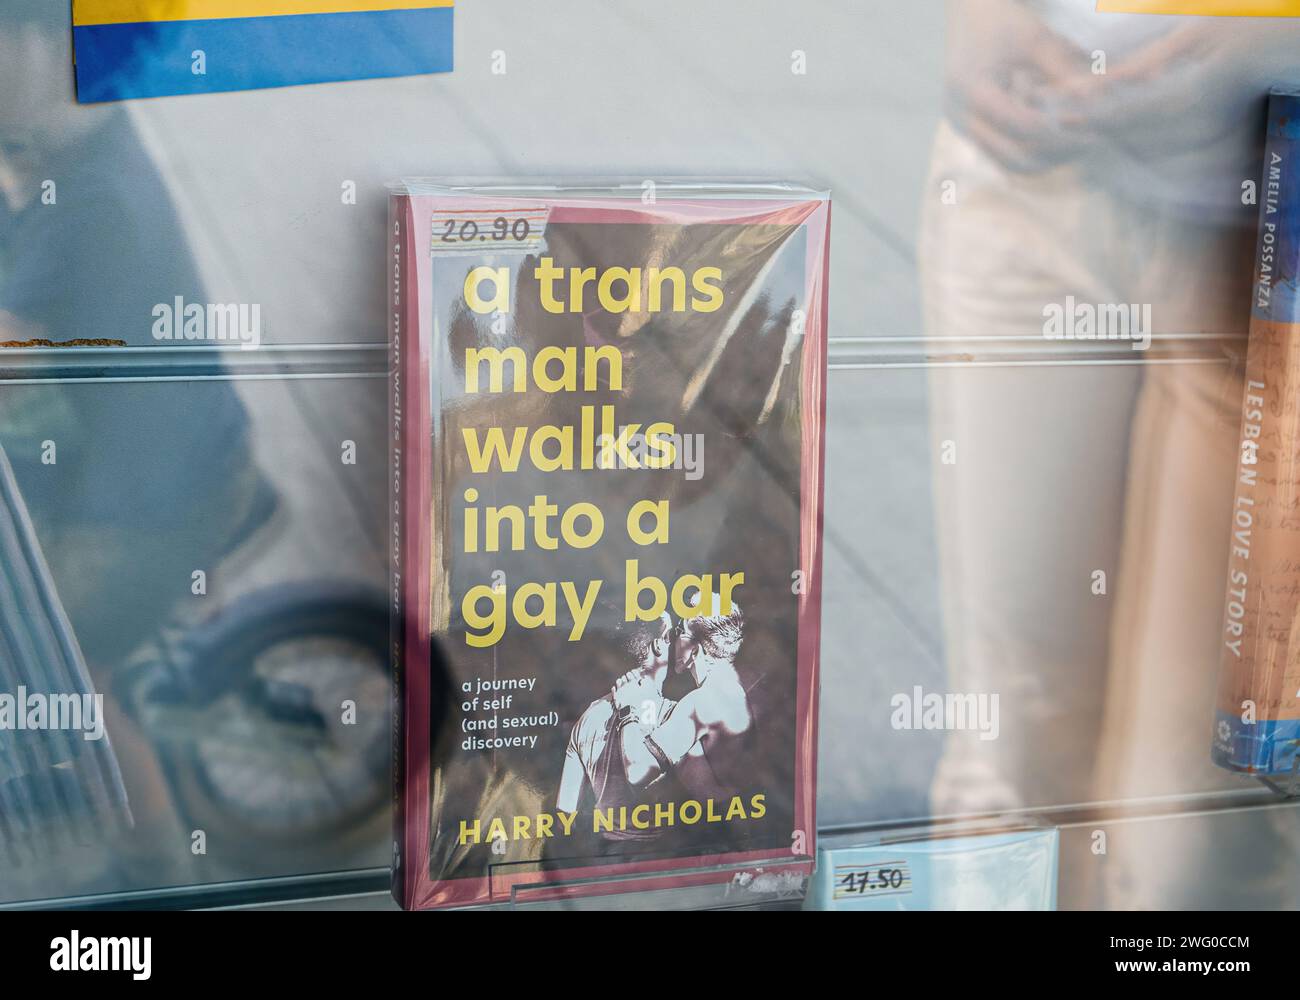 Strasbourg, France - Jul 2, 2023: A book titled A Trans Man Walks into a Gay Bar on display in a store window by Harry Nicholas Stock Photo